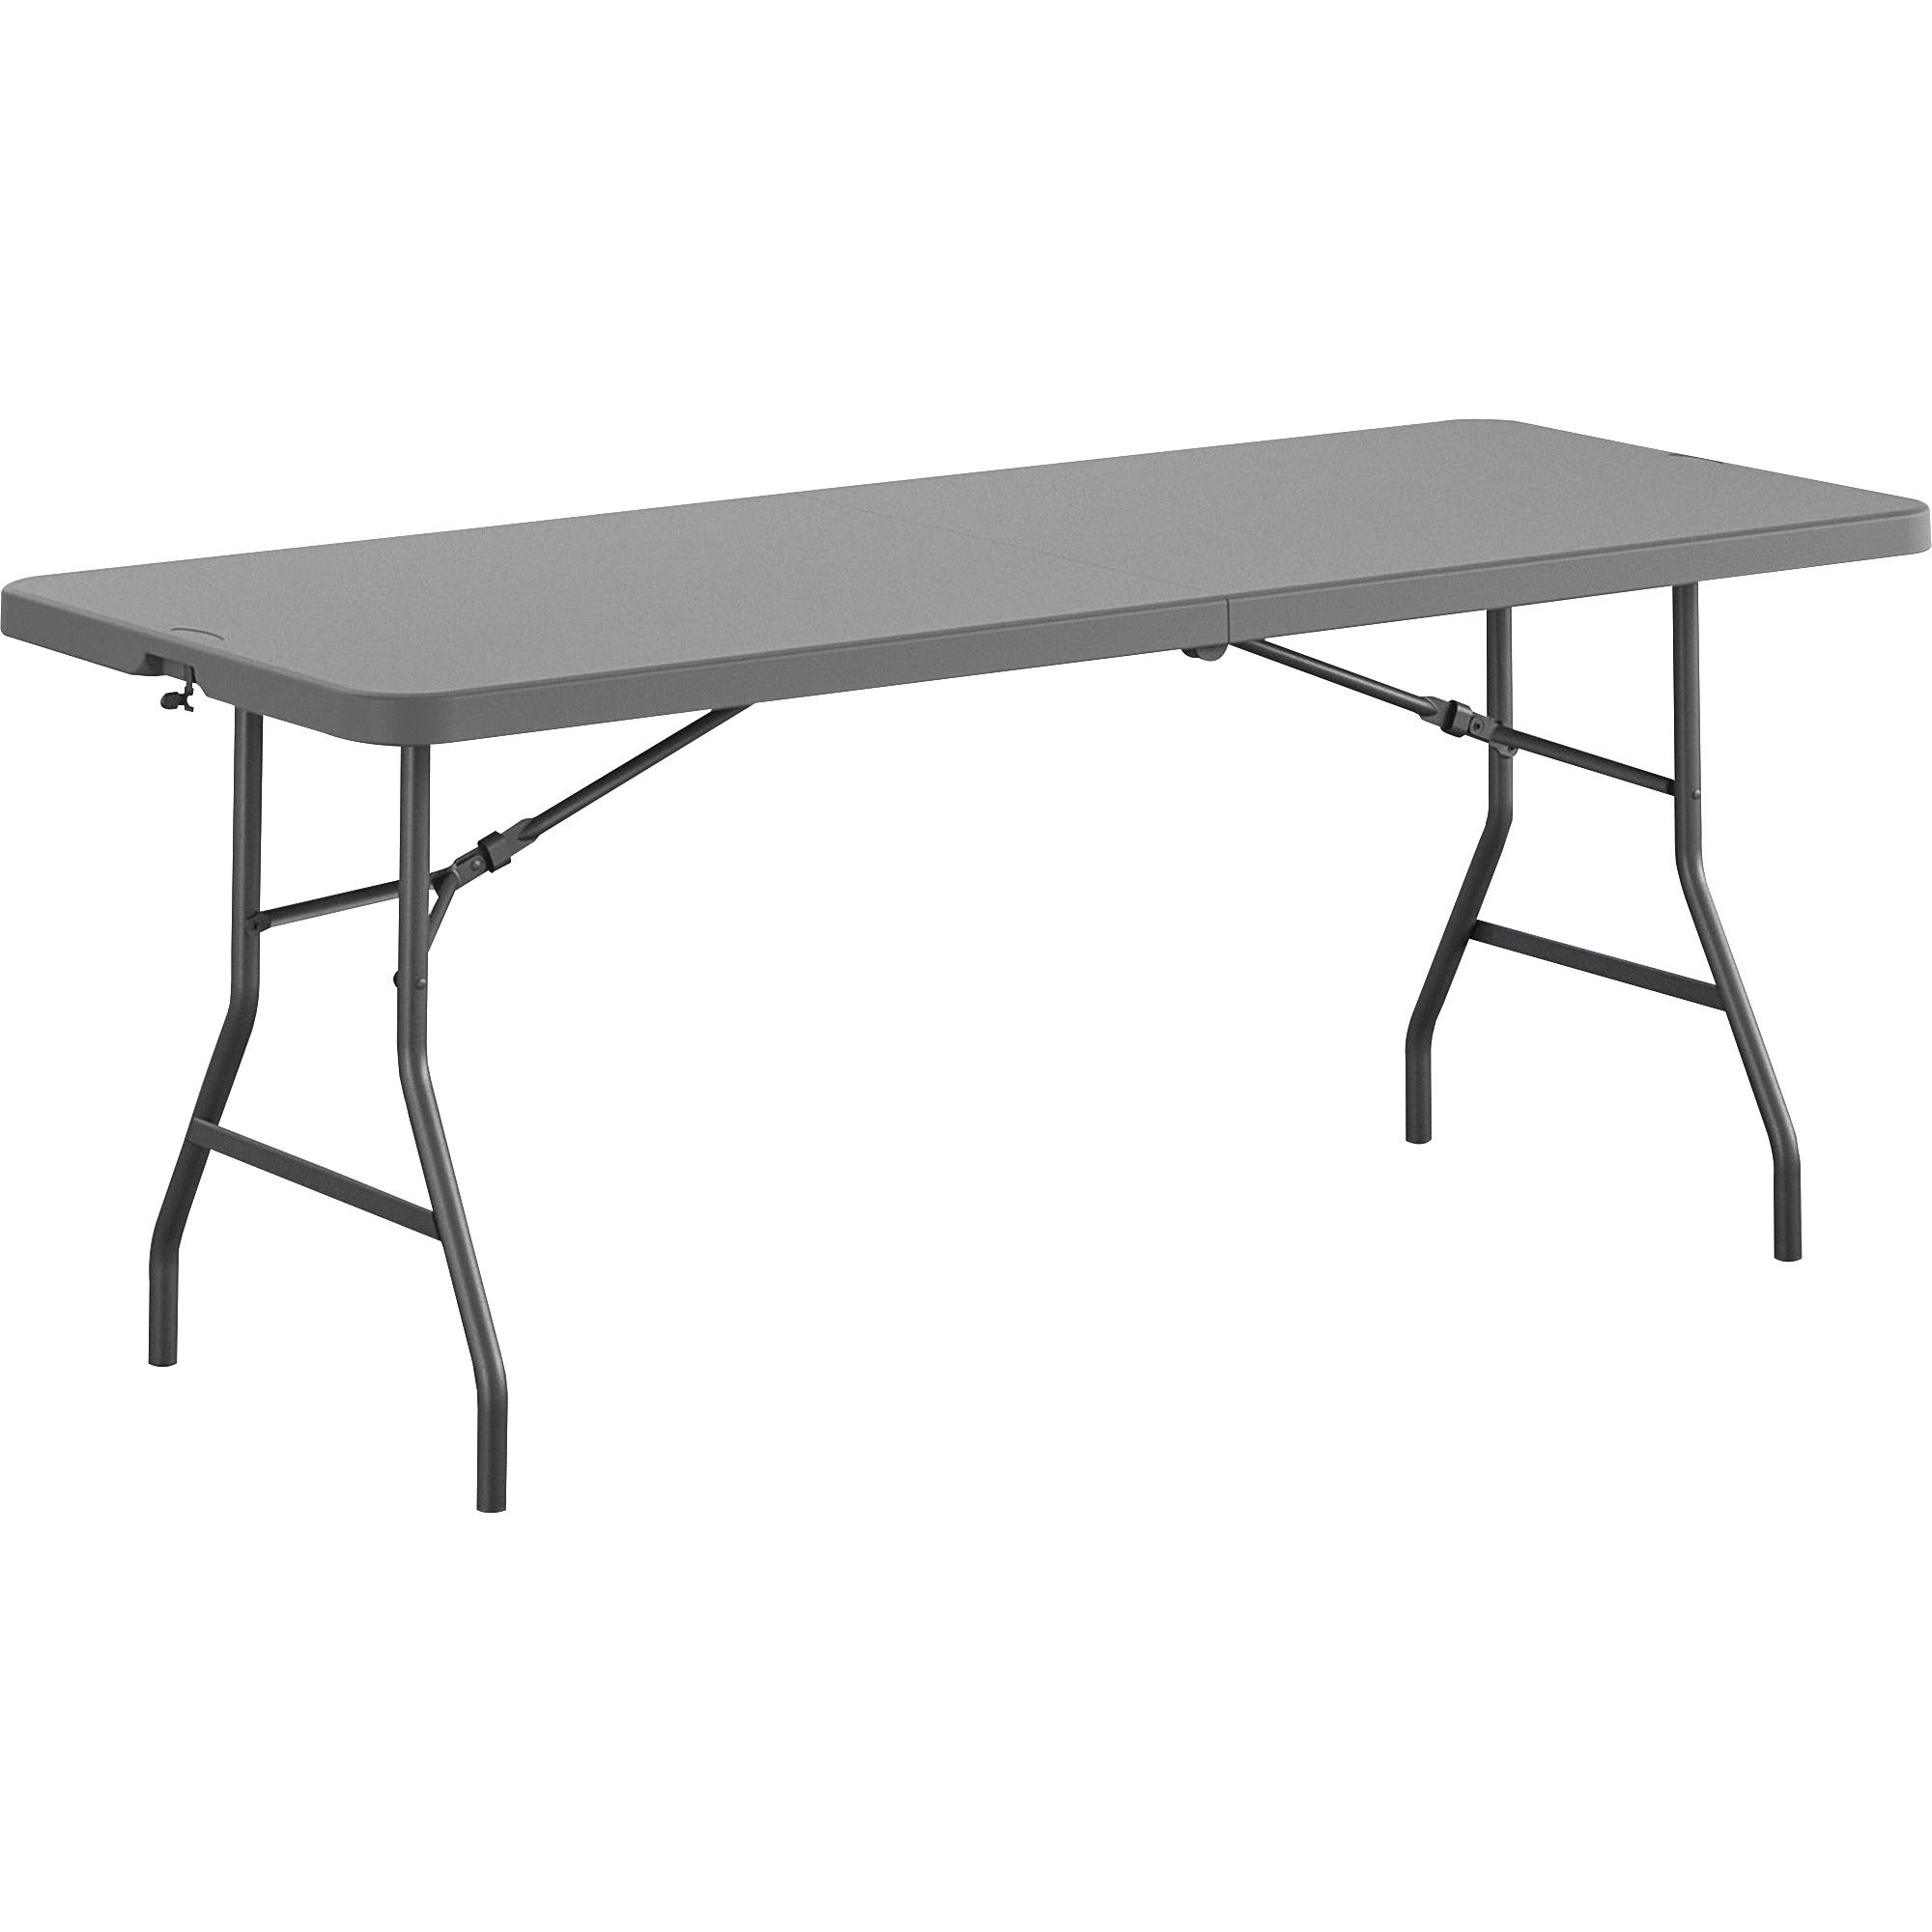 Dorel Zown Commercial Fold-in-Half Blow Mold Table - For - Table TopRectangle Top - Four Leg Base - 4 Legs - 650 lb Capacity x 72" Table Top Width x 30" Table Top Depth - 29.25" Height - Gray - High-density Polyethylene (HDPE), Resin - 1 Each - 1